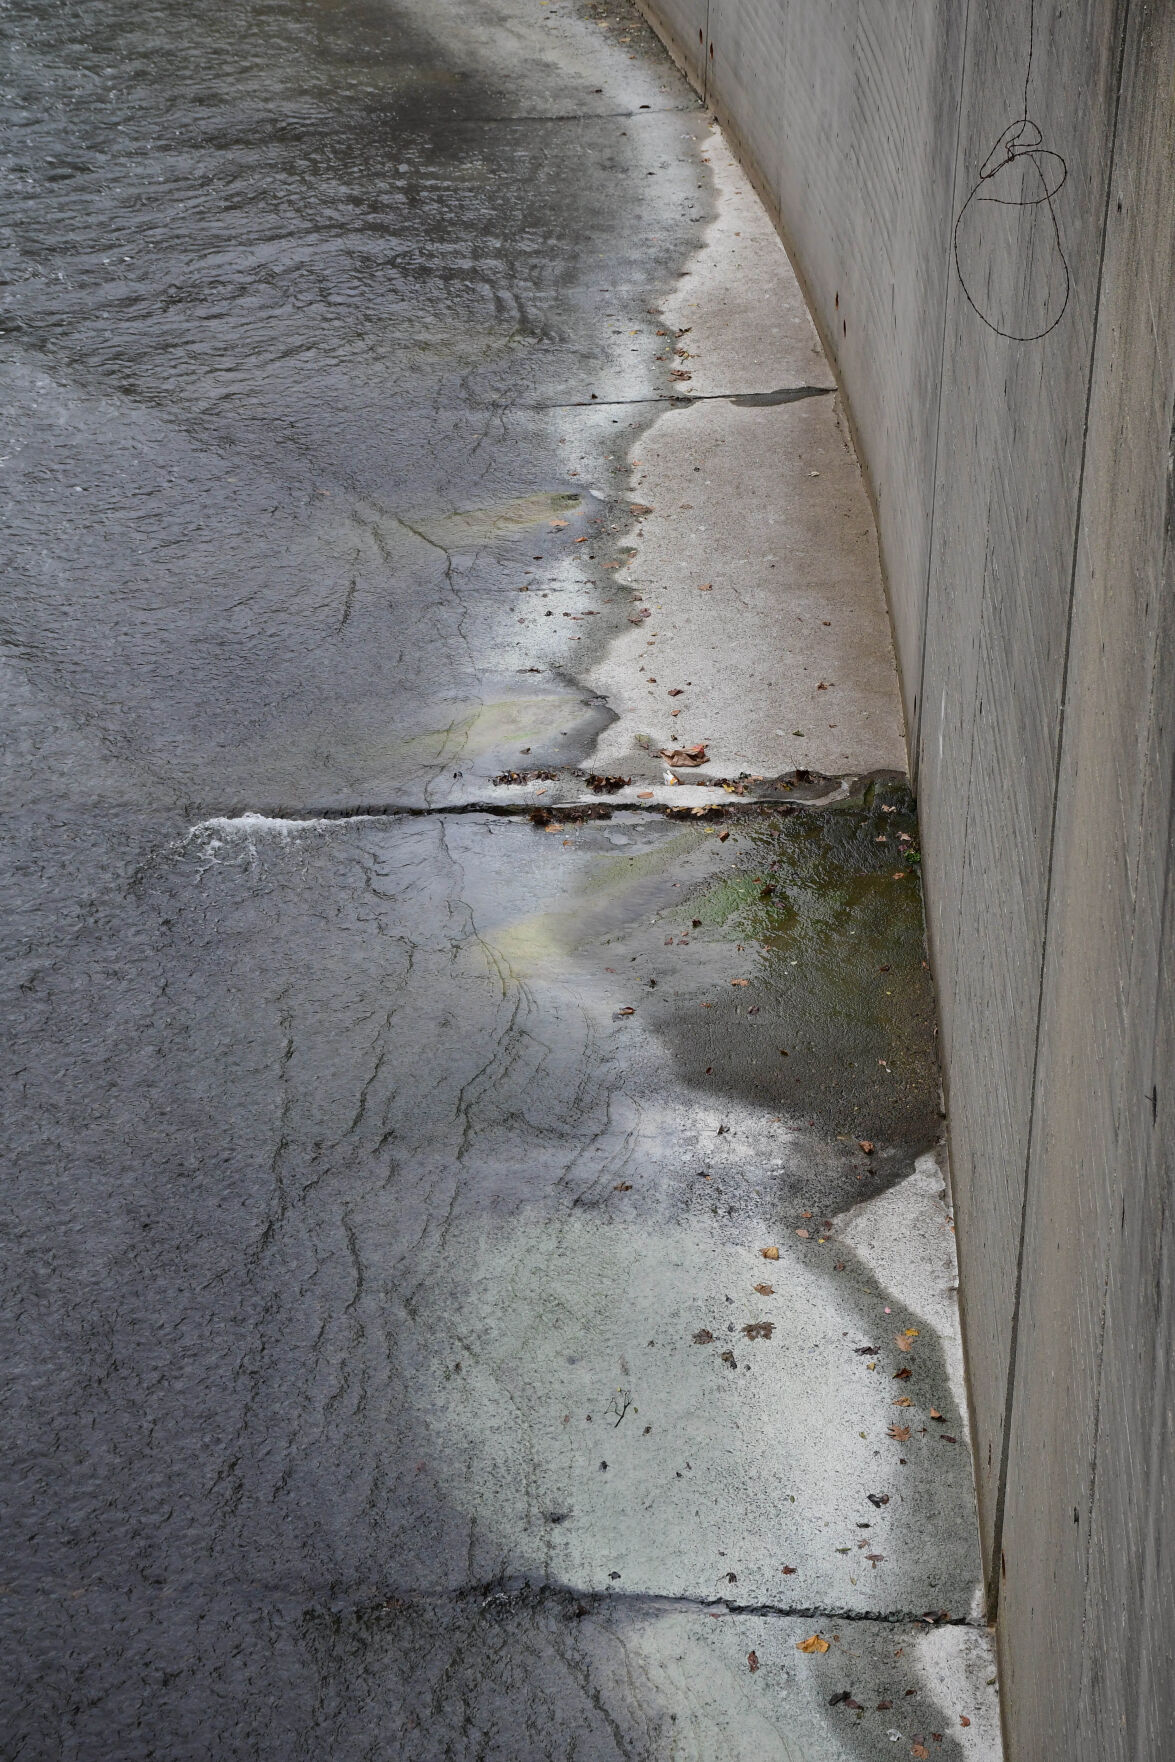 Chalky residue on the cement section of the river